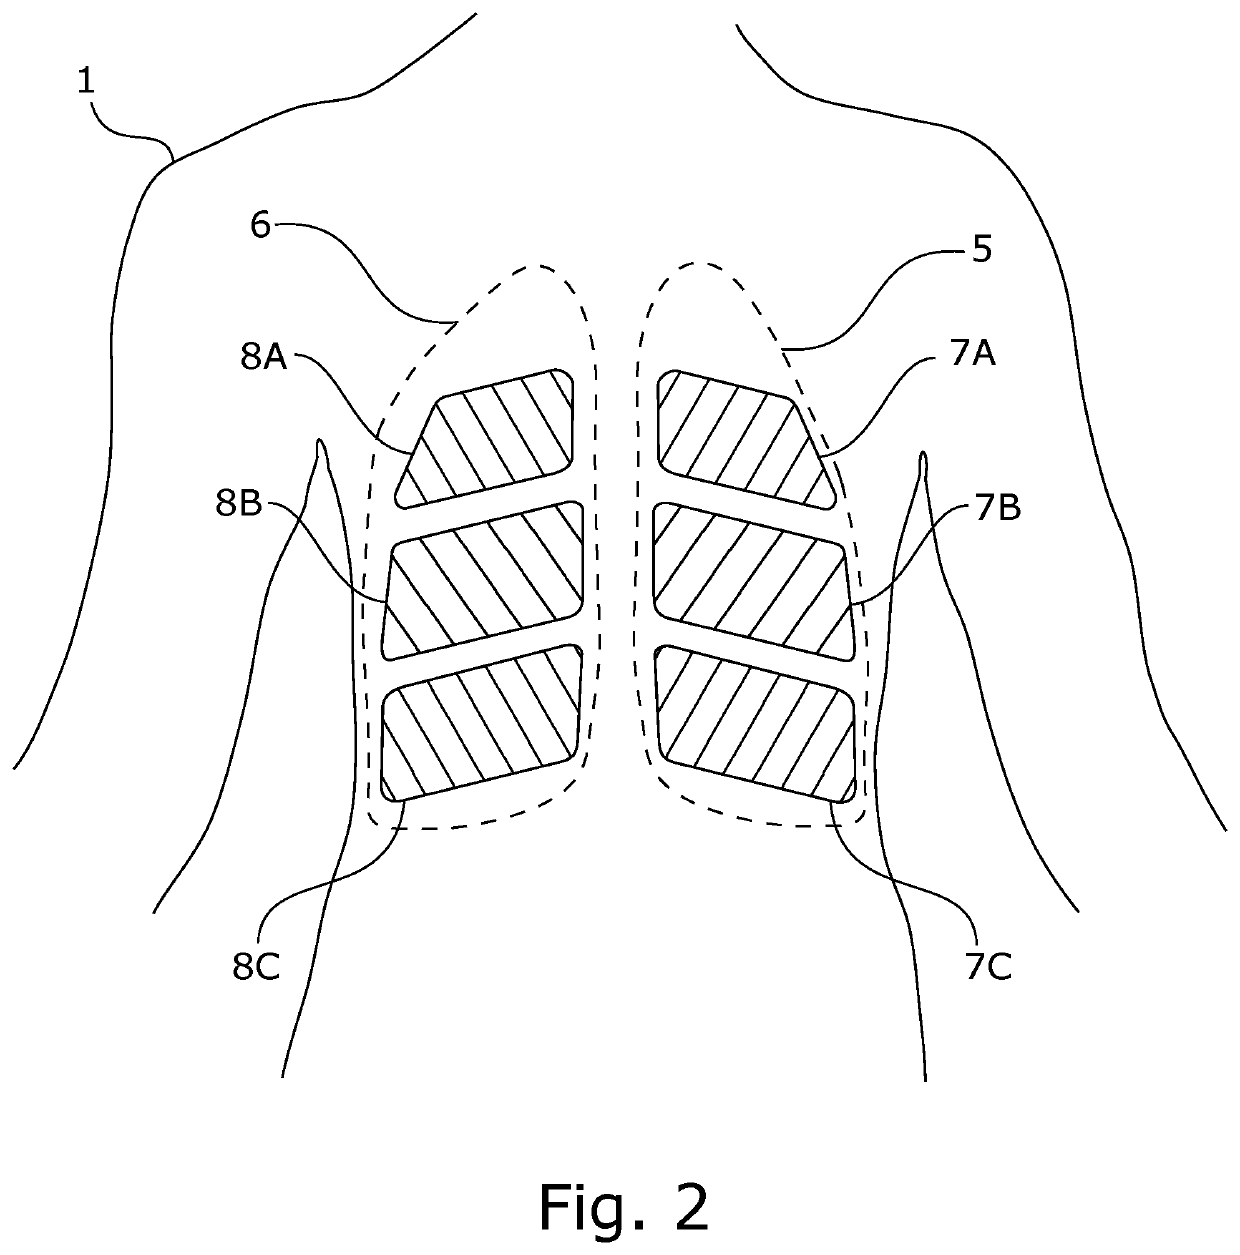 System for treating unwanted tissue using heat and heat activated drugs